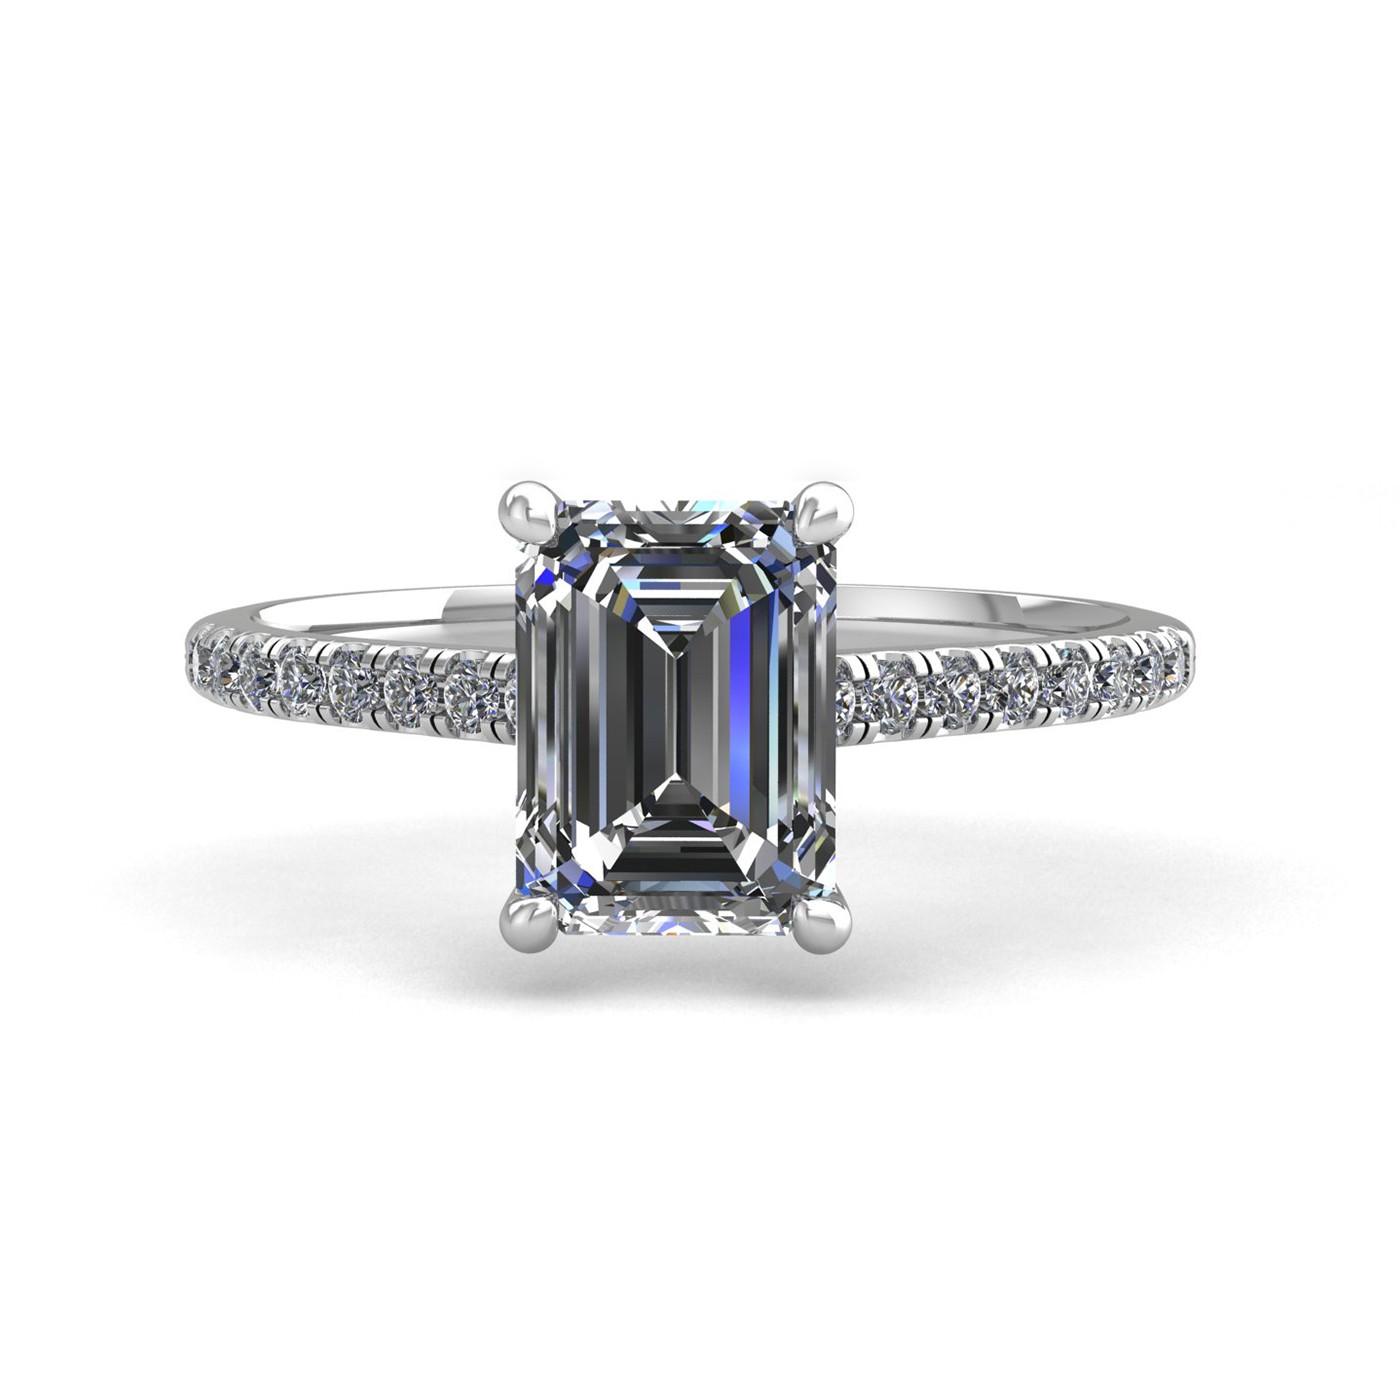 18k white gold 1.20ct 4 prongs emerald cut diamond engagement ring with whisper thin pavÉ set band